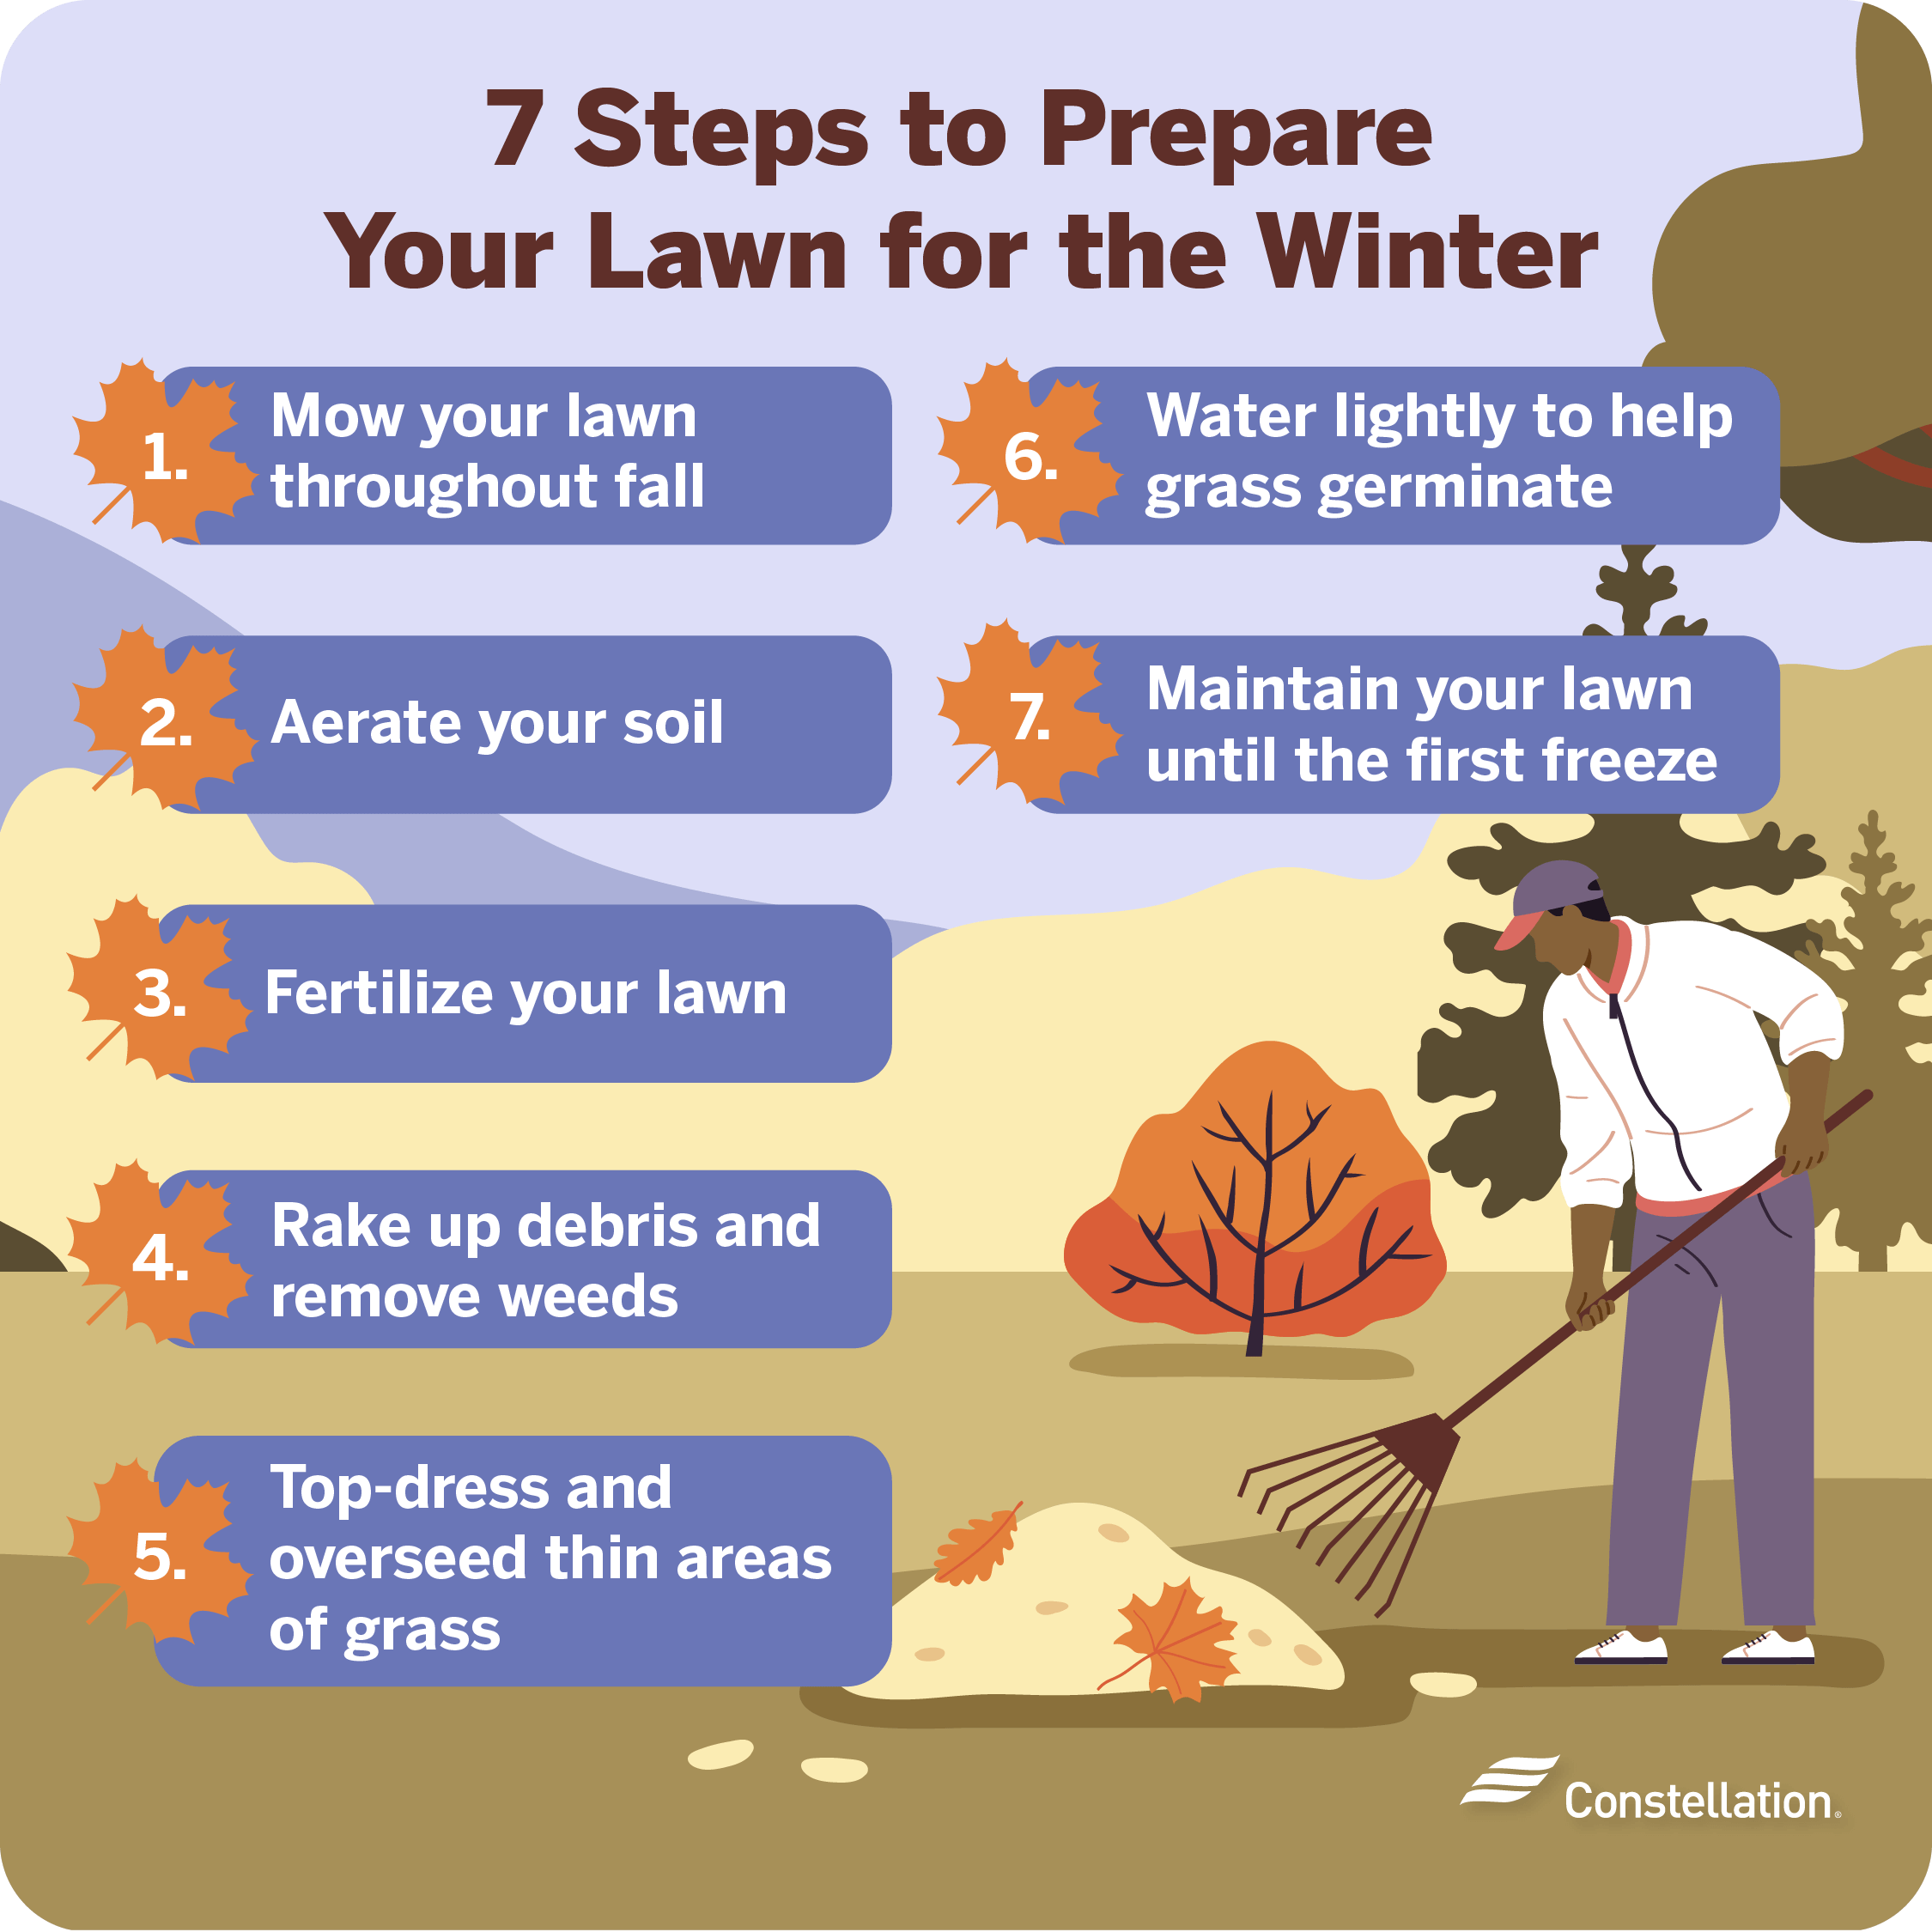 Steps to prepare your lawn for winter.